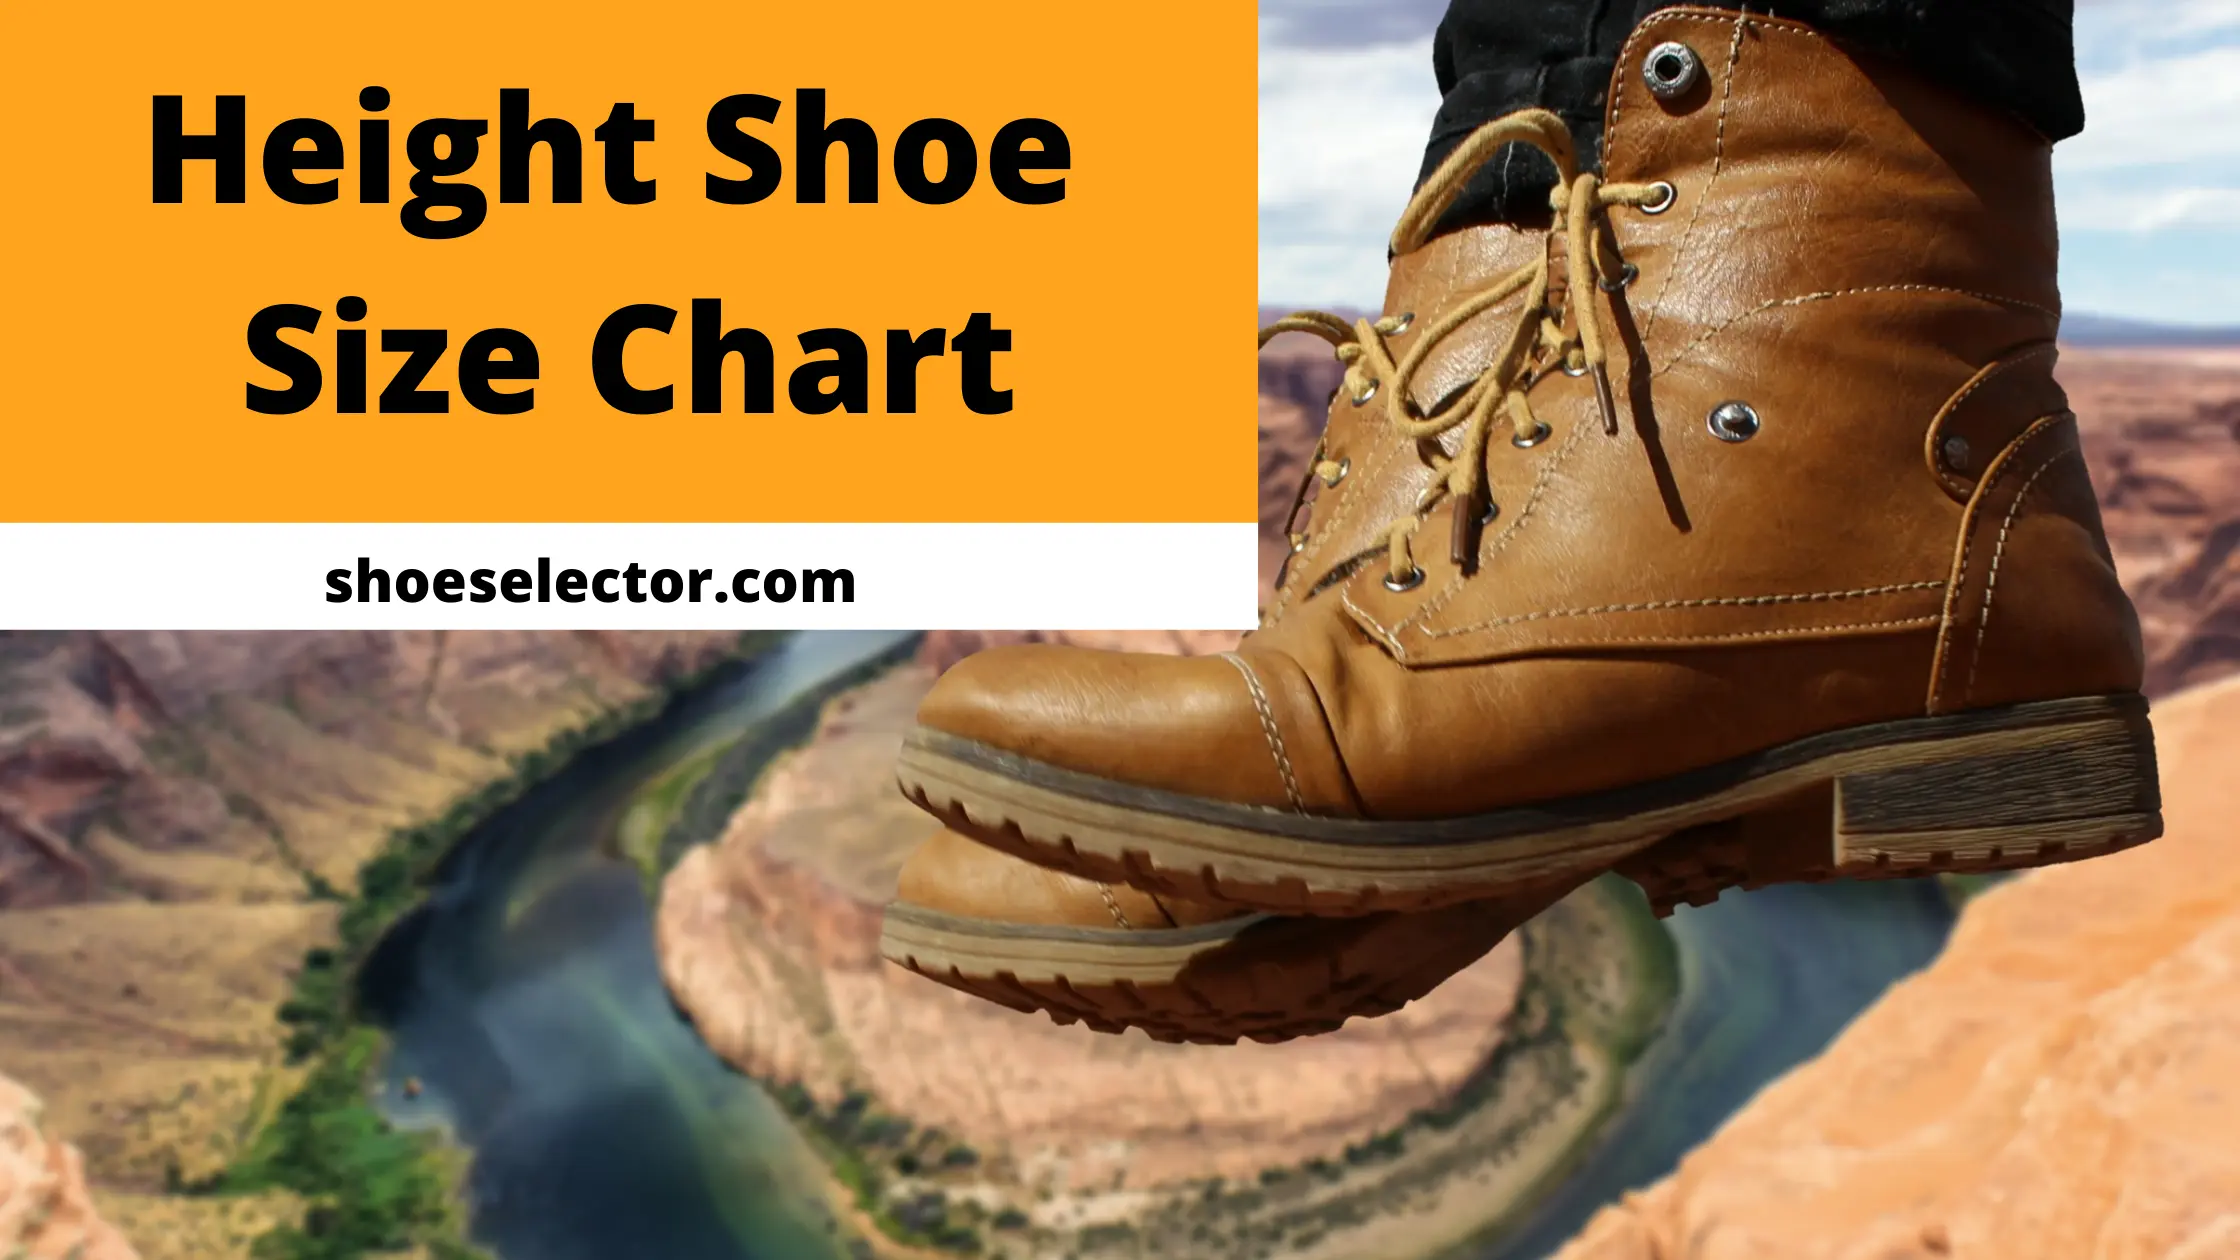 Height Shoe Size Chart - Find the Perfect Fit for Your Feet